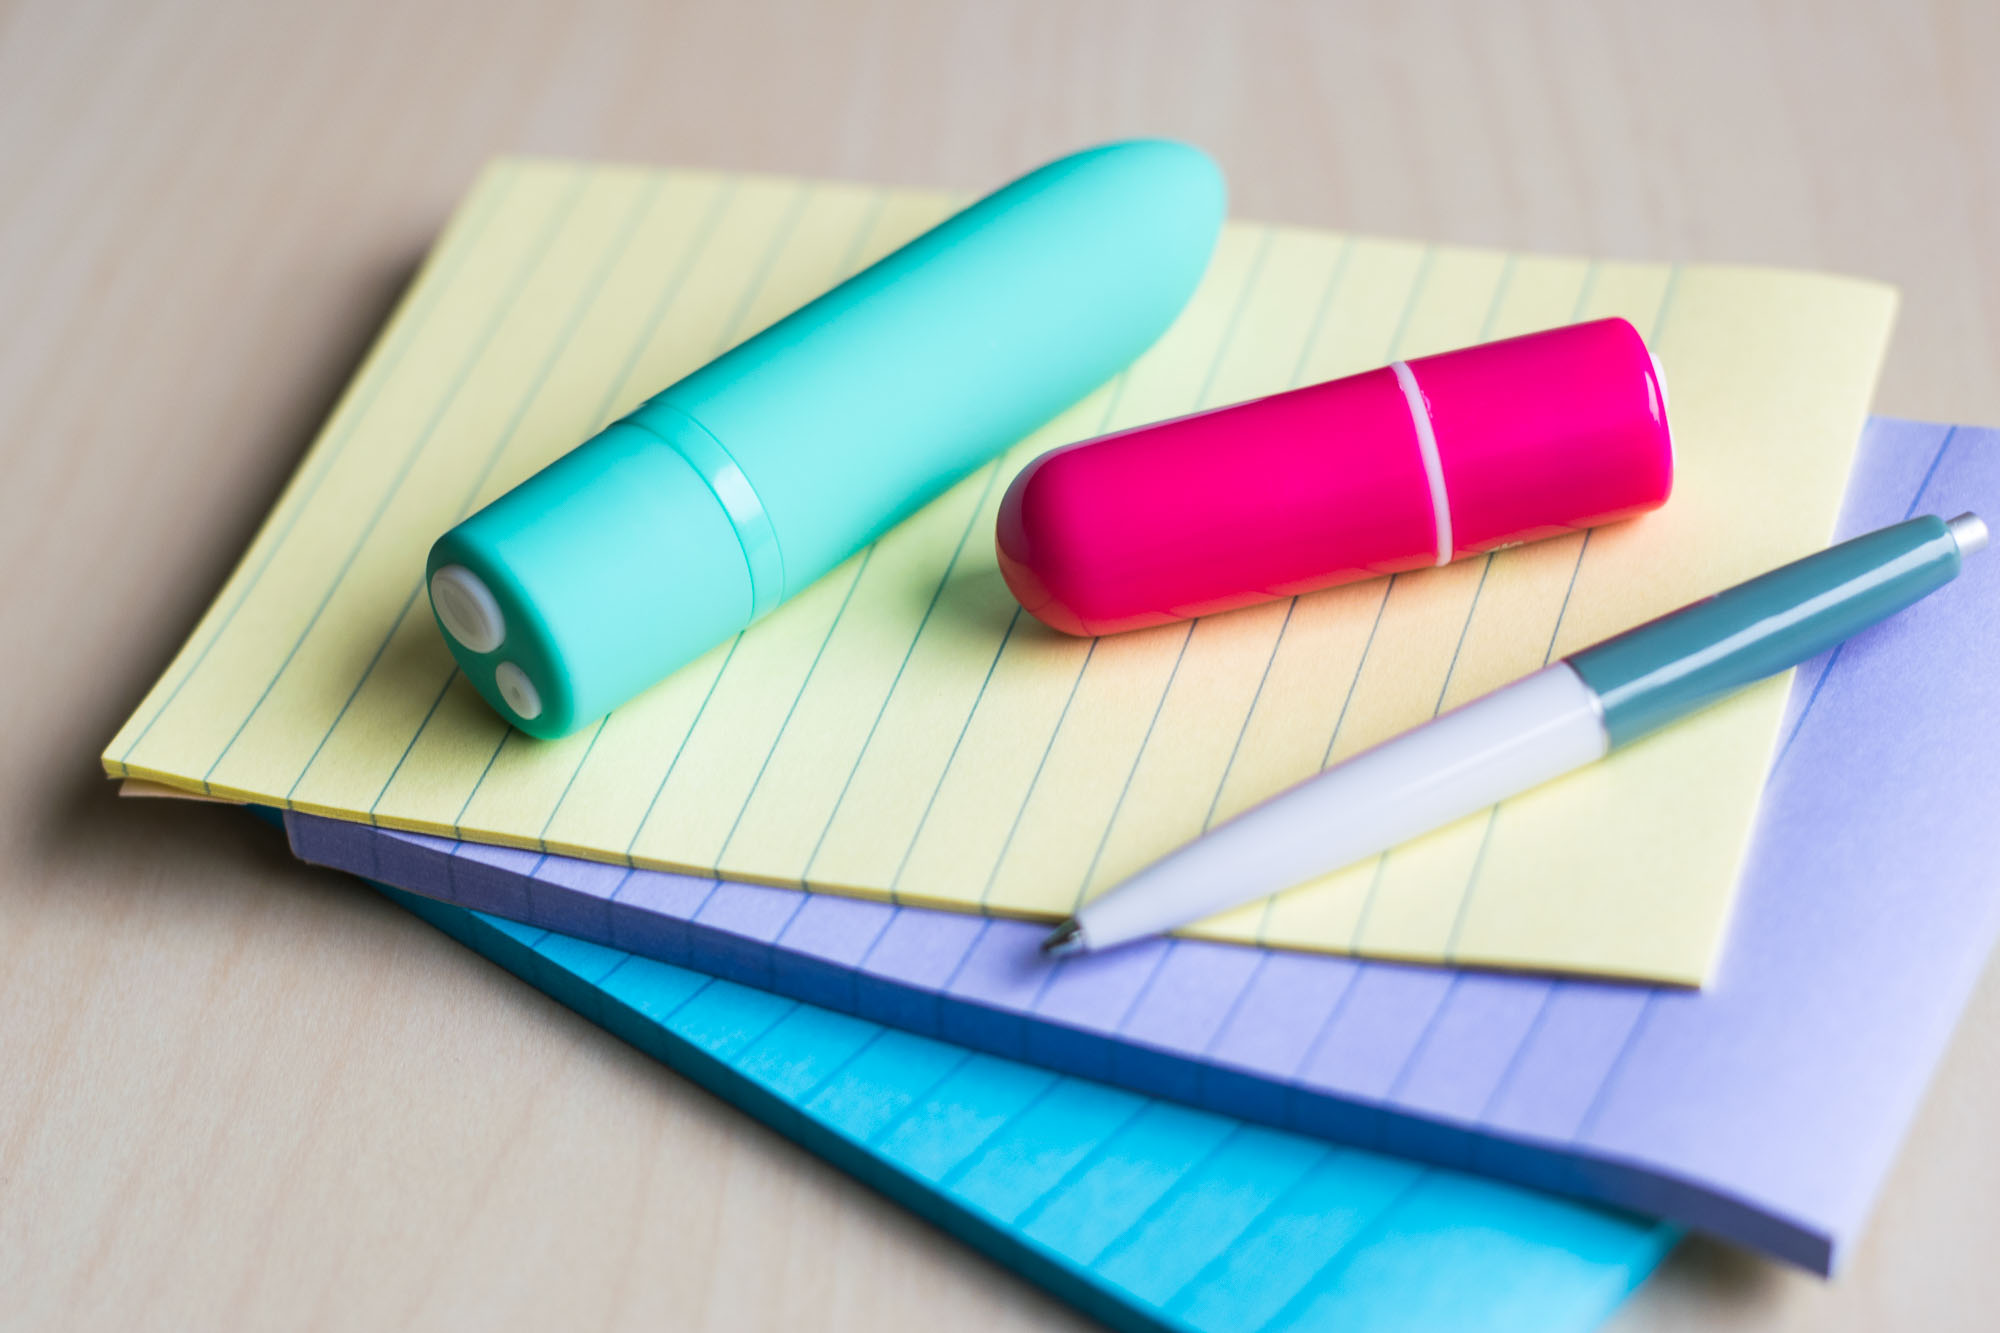 Screaming O Charged Positive and Vooom rechargeable bullet vibrators on top of a pile of colorful lined notepads.